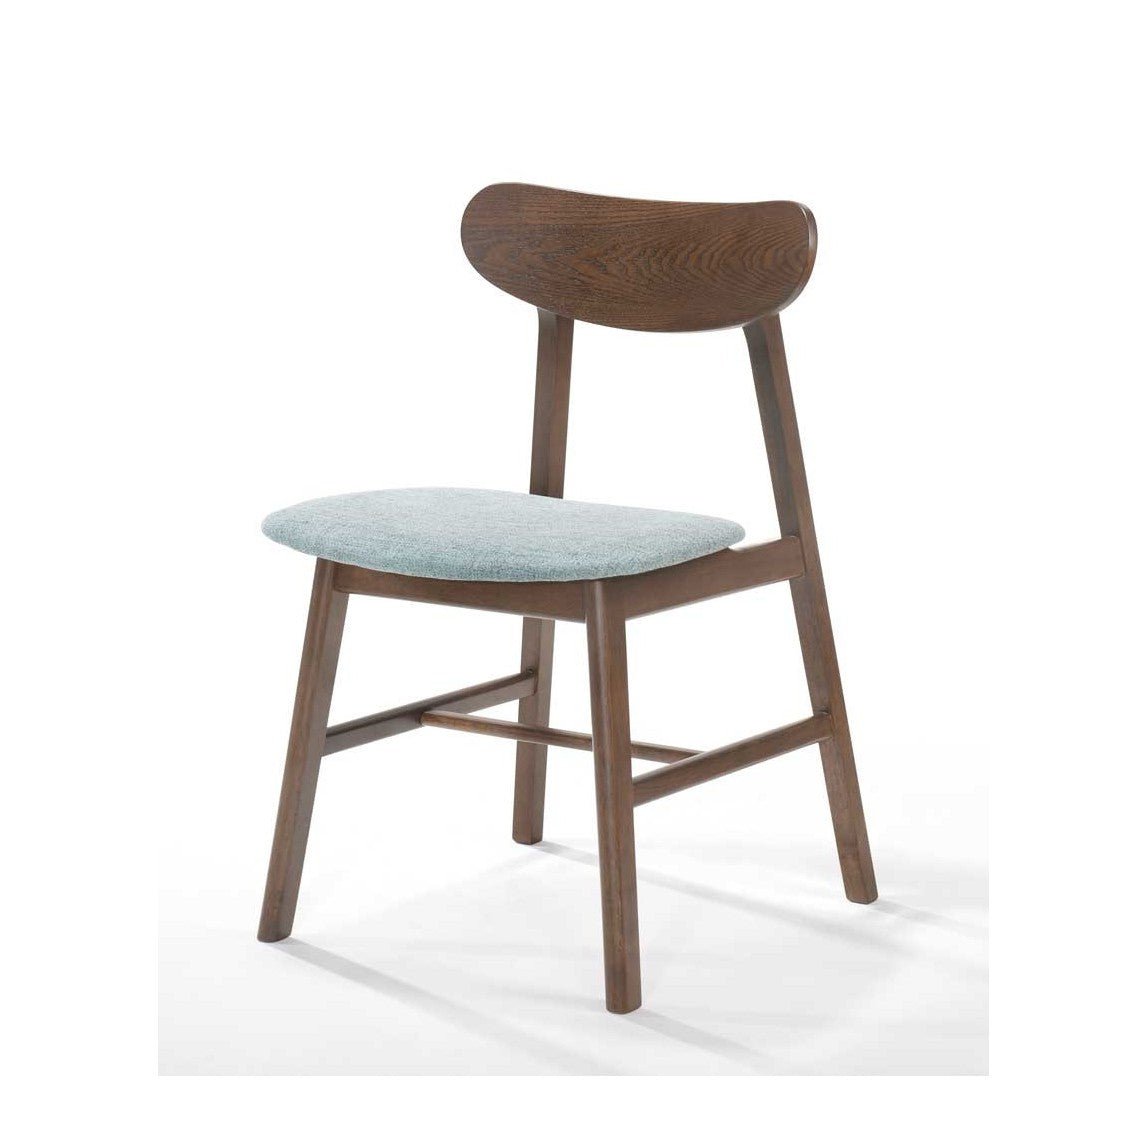 Nent Dining Chair - Unica Interior